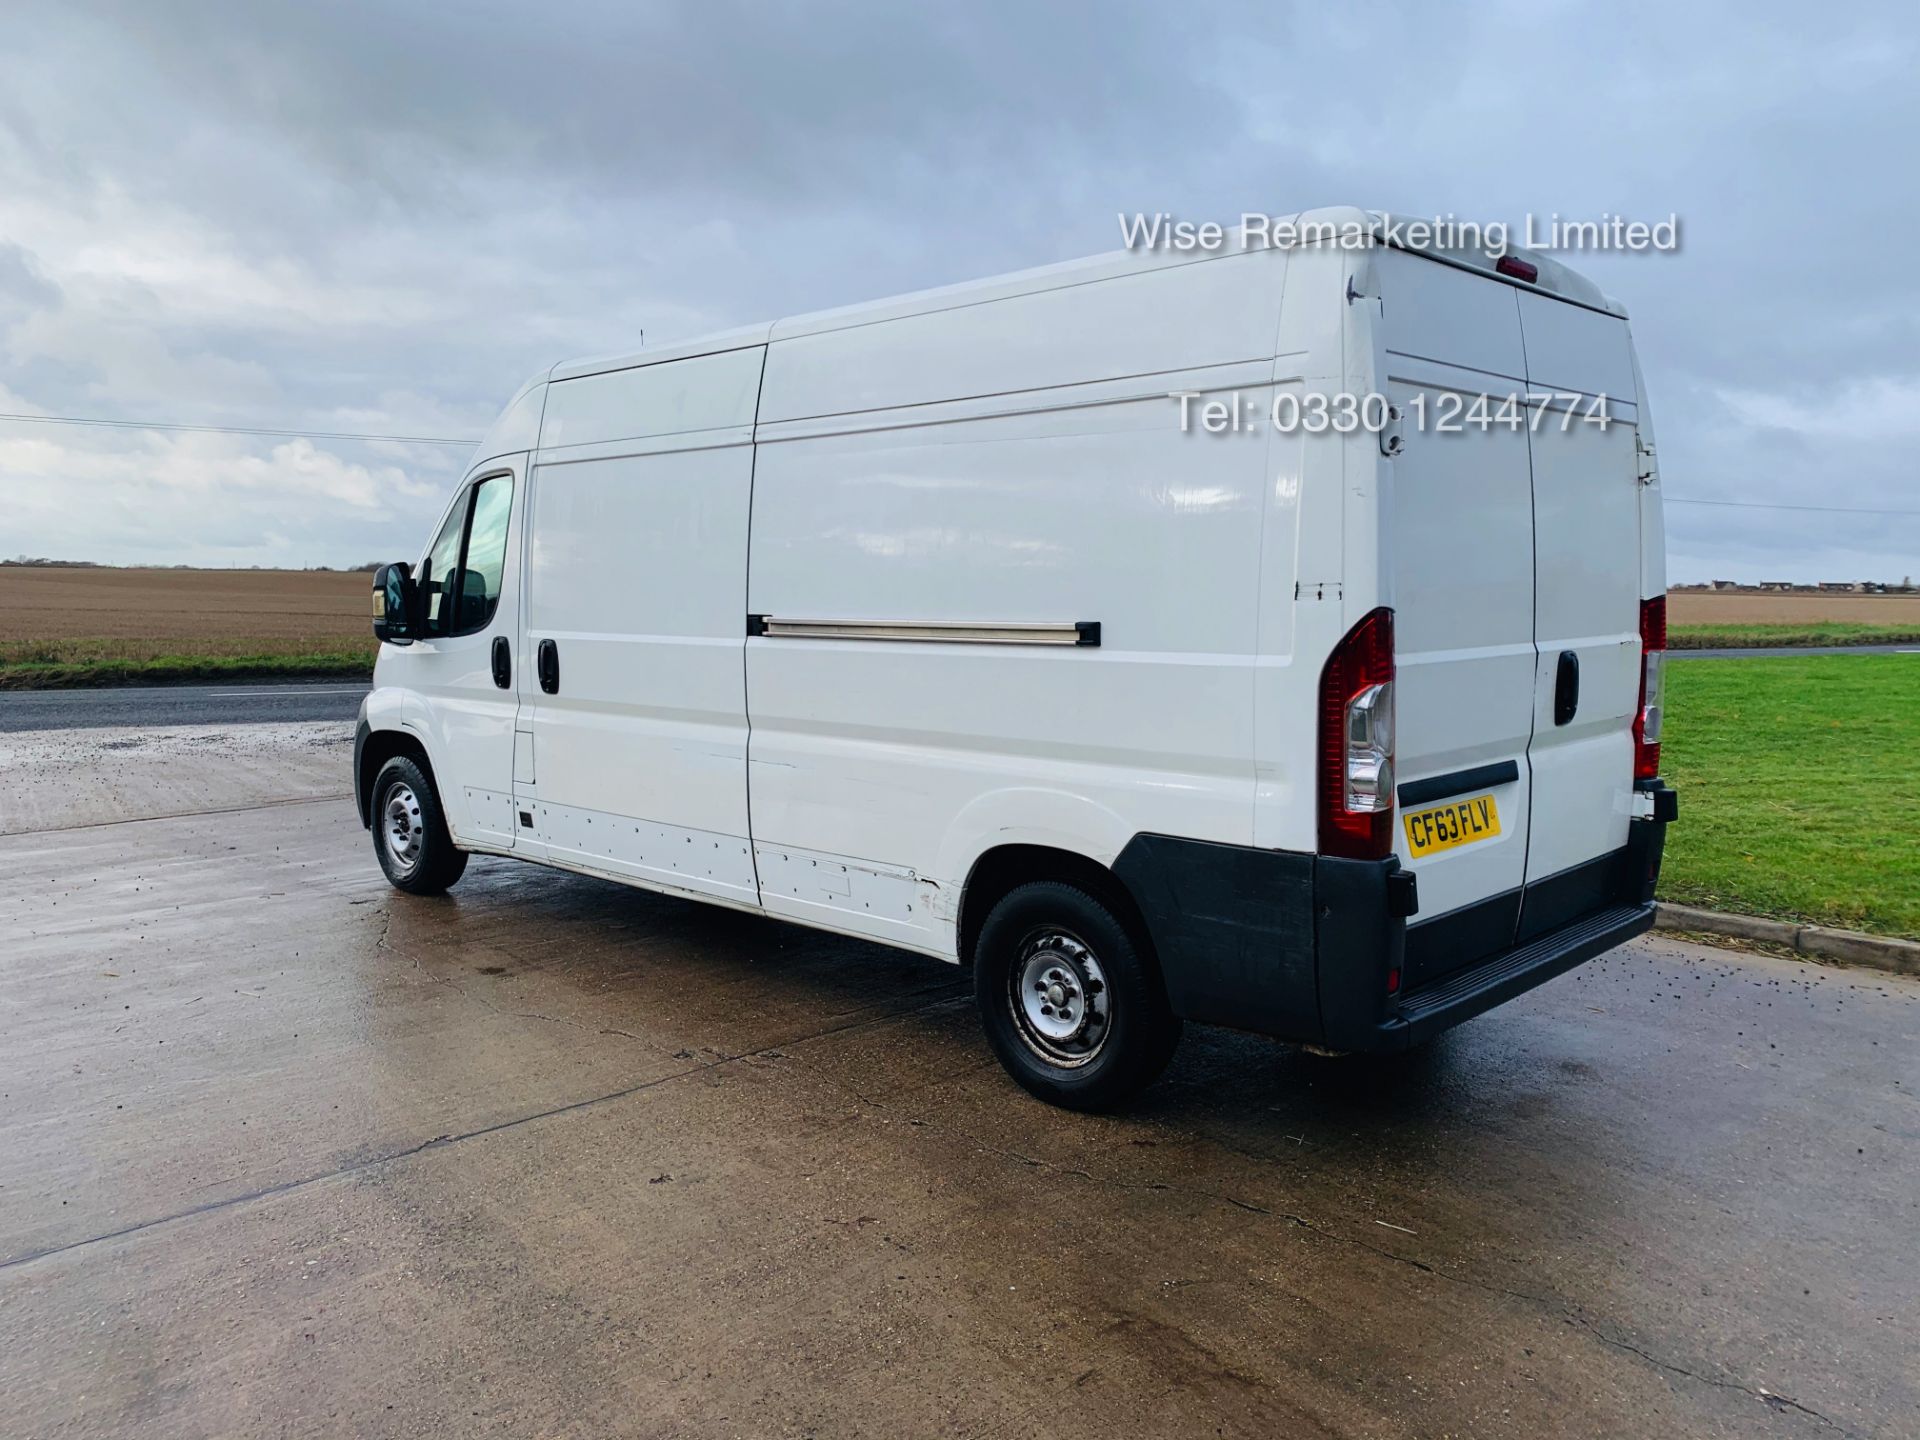 Peugeot Boxer 335 2.2 HDi (L3H2) 2014 Model - 1 Keeper From New - Long Wheel Base - Image 5 of 17